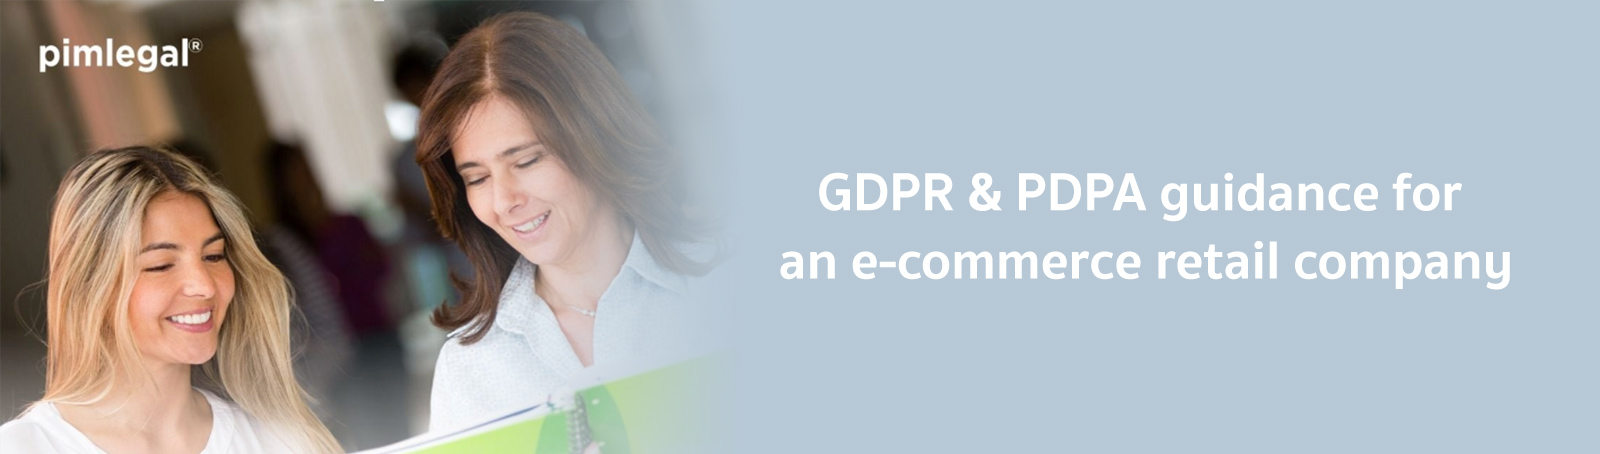 GDPR & PDPA guidance for an e-commerce retail company